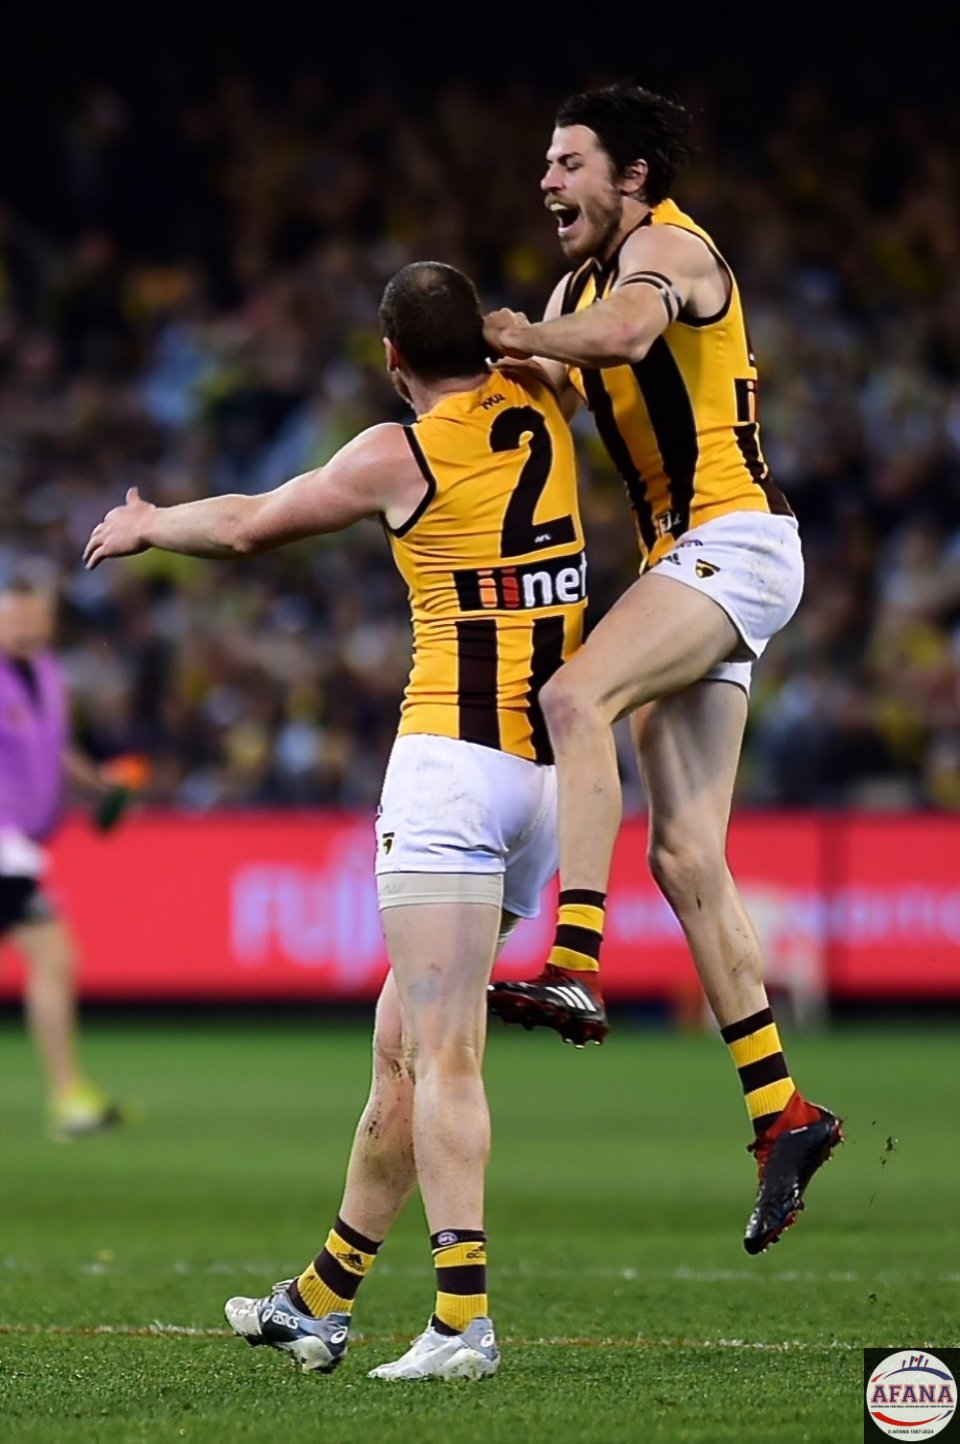 Jarryd Roughead and Isaac Smith celebrate